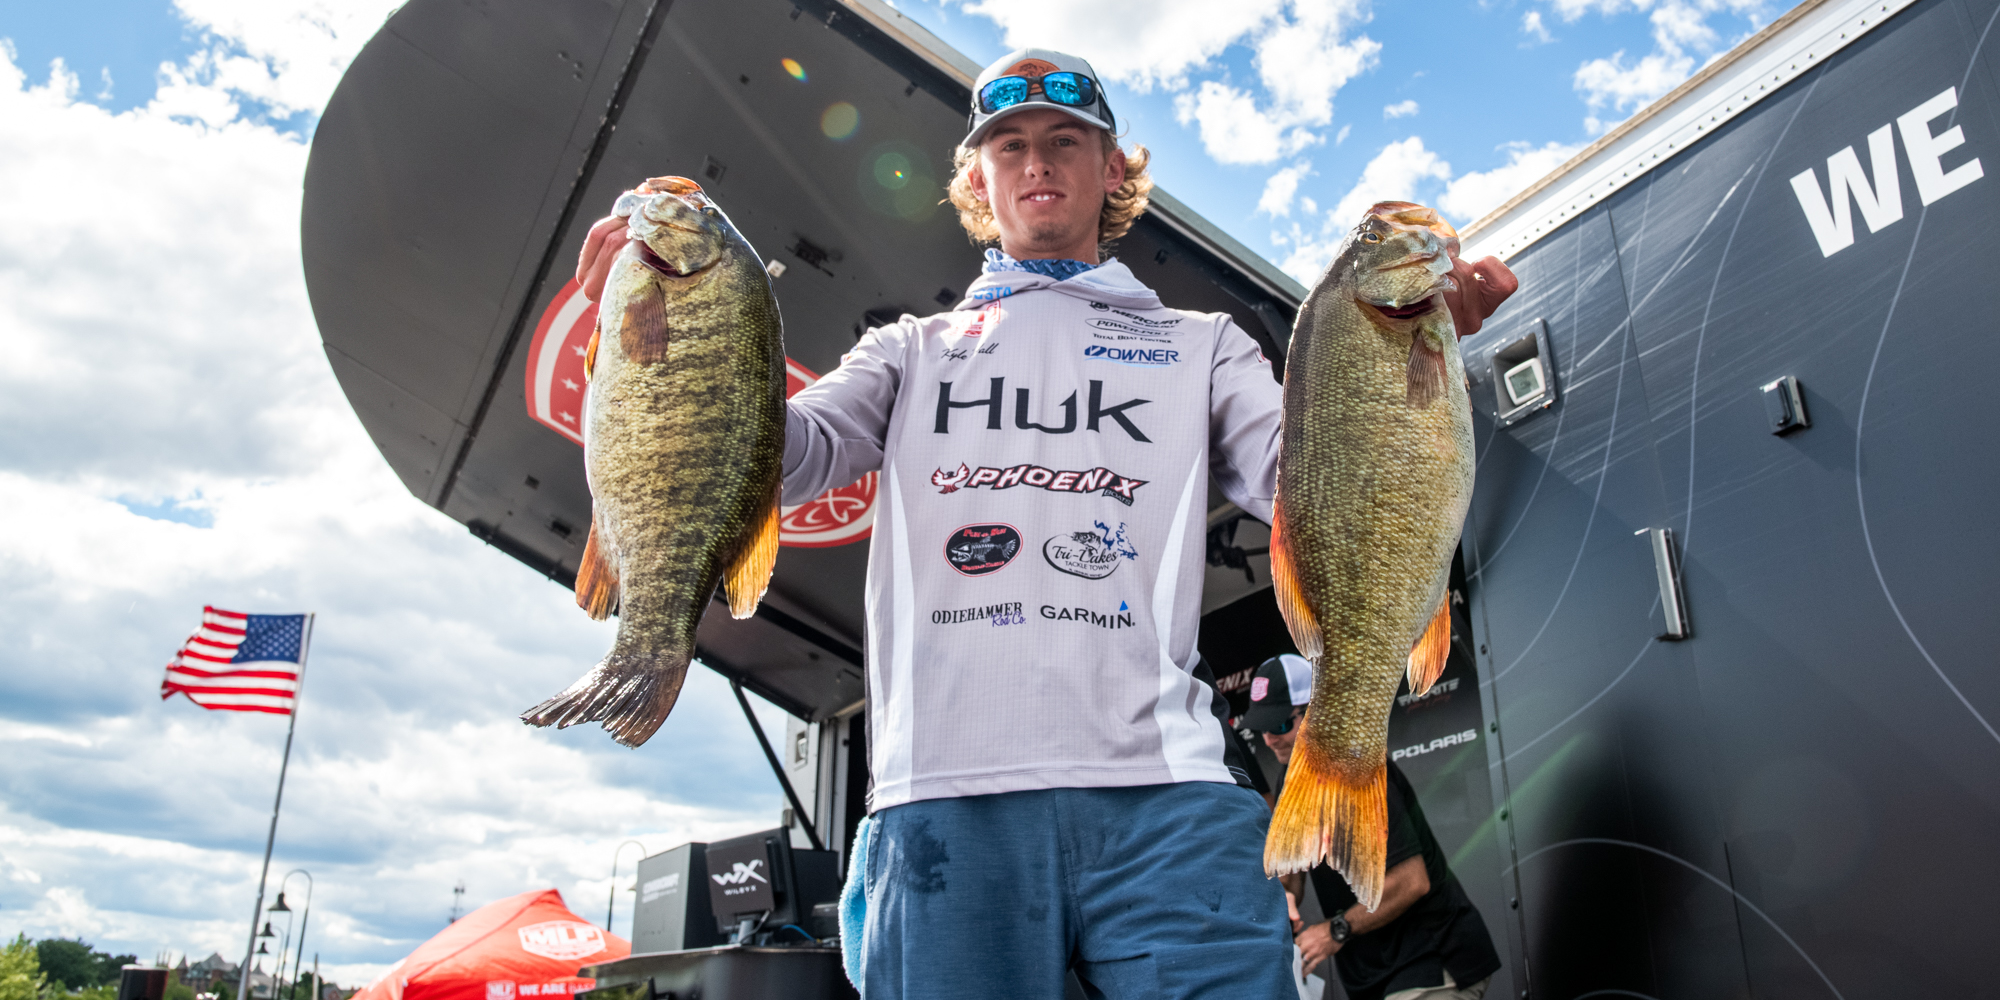 Kyle Hall Takes Early Lead on Day 1 of Tackle Warehouse Pro